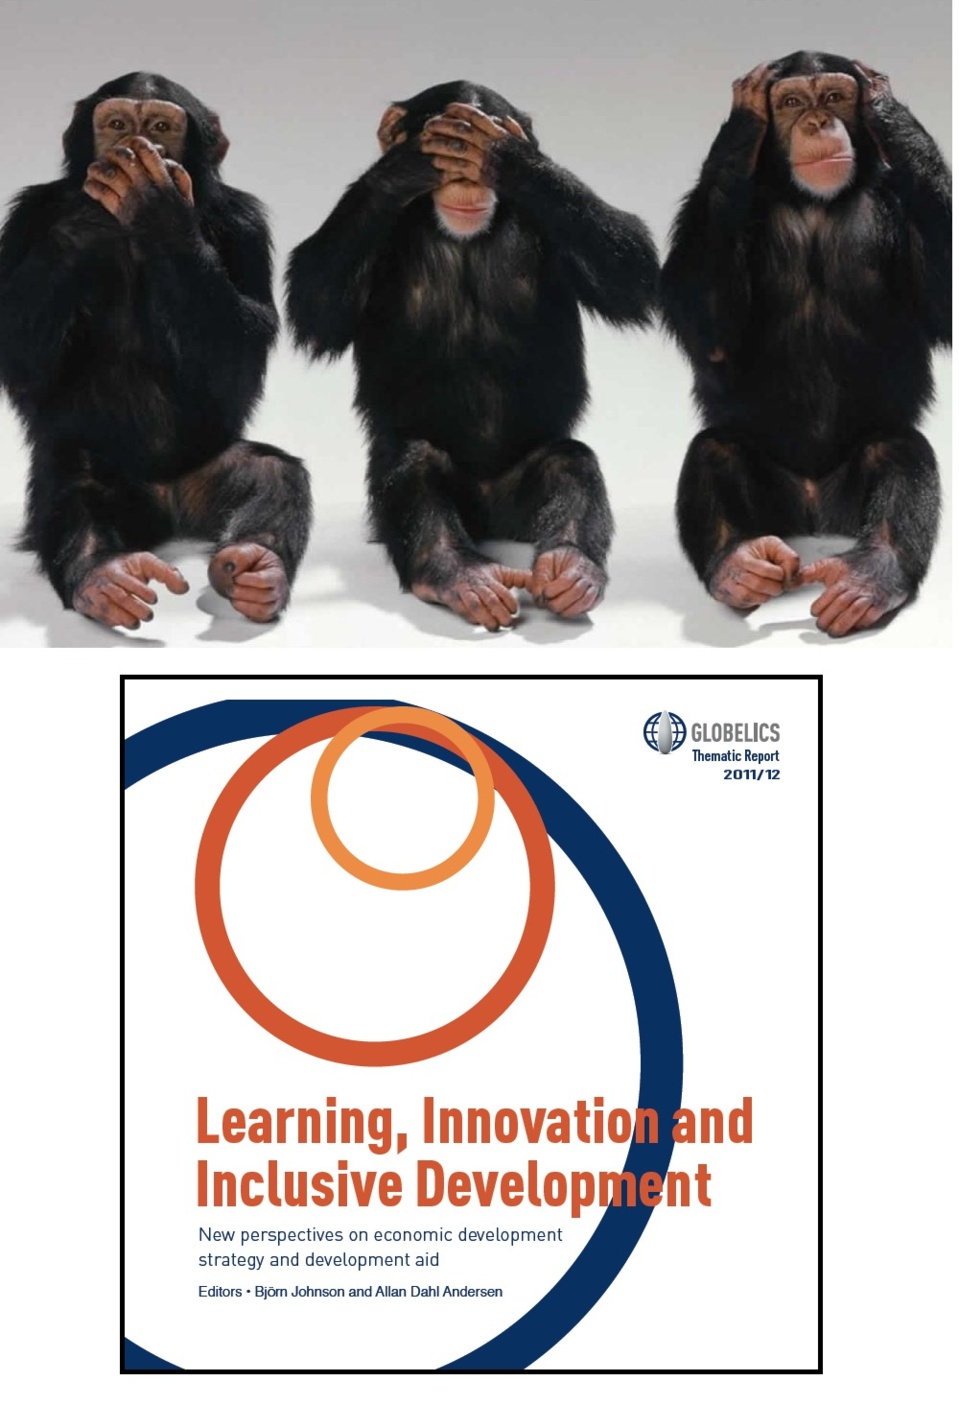 'Learning, Innovation and Inclusive Development'- GLOBELICS Thematic Report 2012